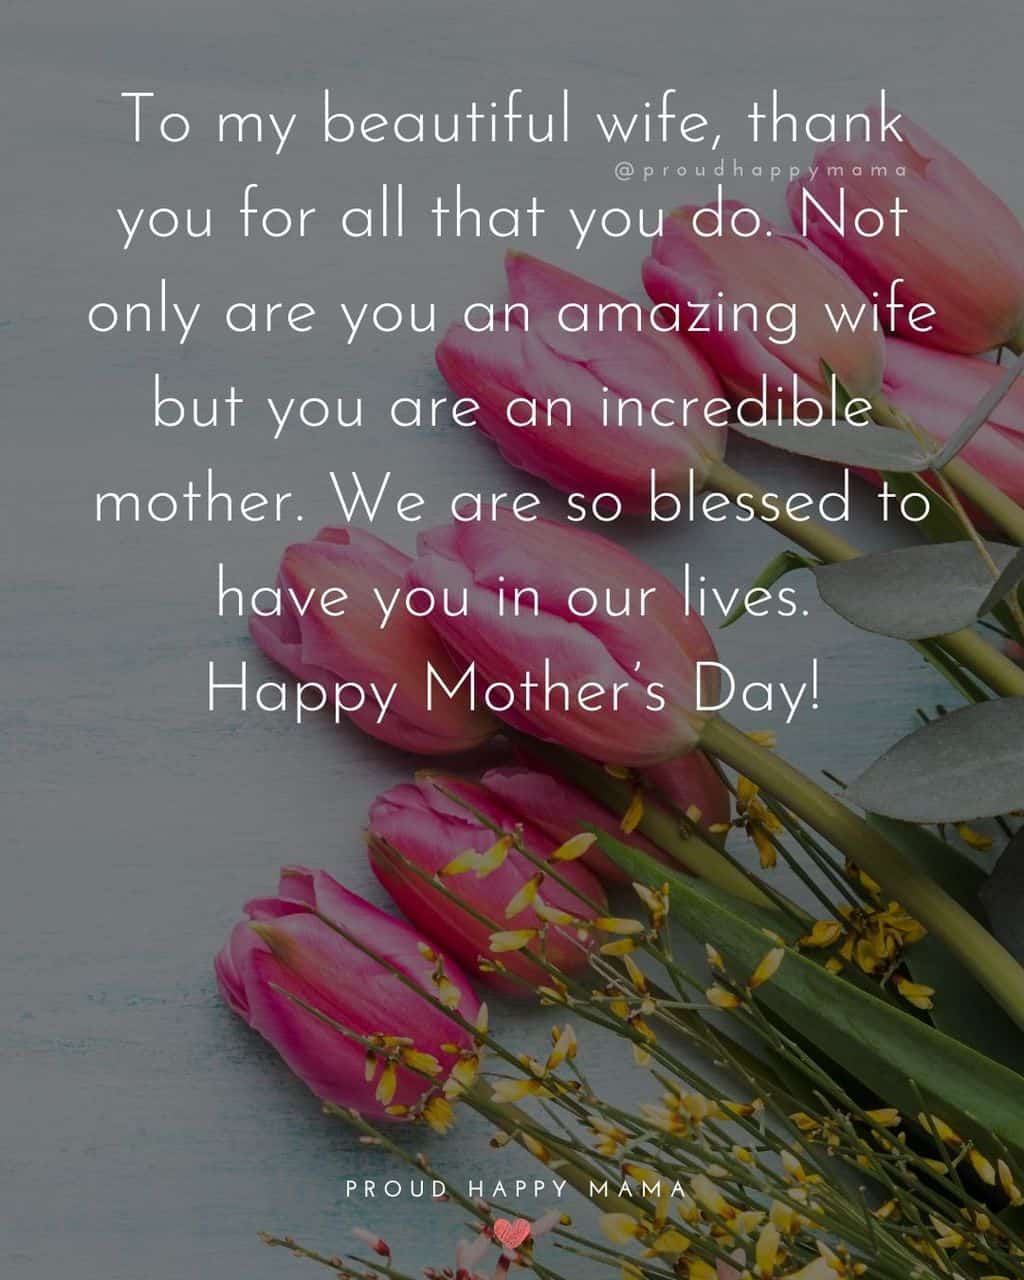 Mothers Day Quotes For Wife - To my beautiful wife, thank you for all that you do. Not only are you an amazing wife but you are an incredible mother. We are so blessed to have you in our lives.